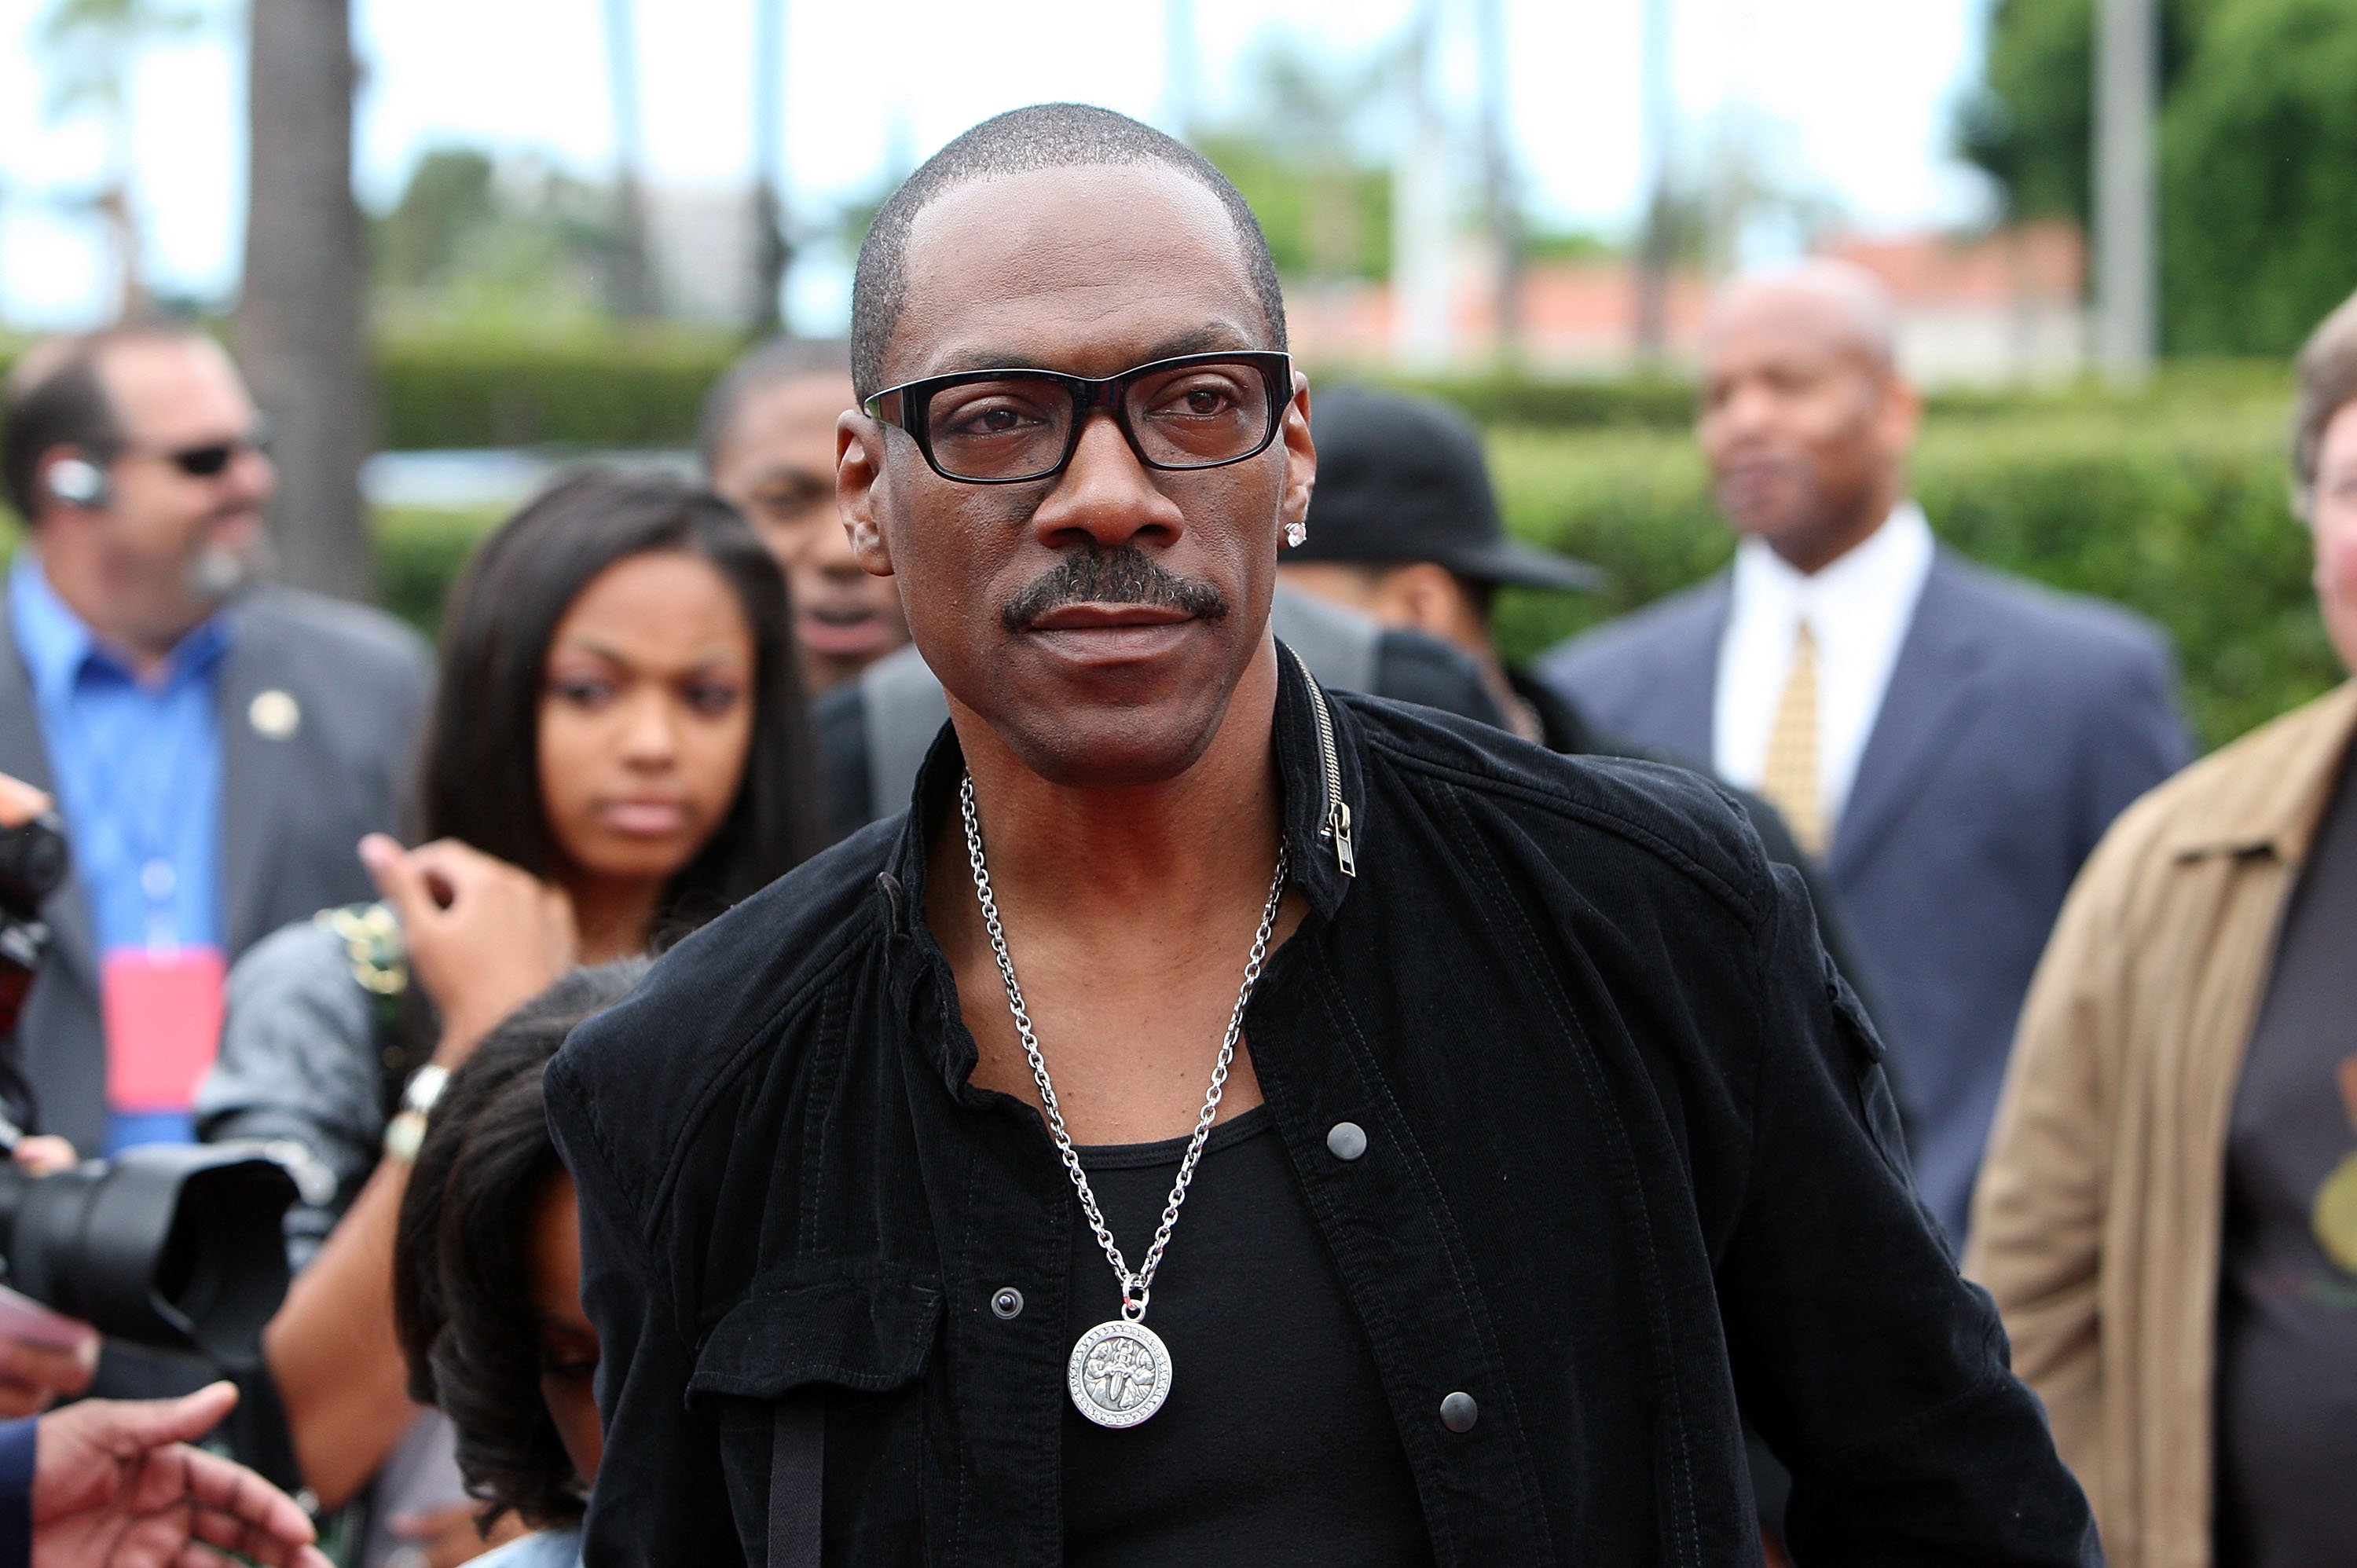  Eddie Murphy arrives at the Premiere Of Paramount Pictures & Nickelodeon's "Imagine That" at Paramount Theater on the Paramount Studios lot on June 6, 2009, in Los Angeles, California. | Source: Getty Images.